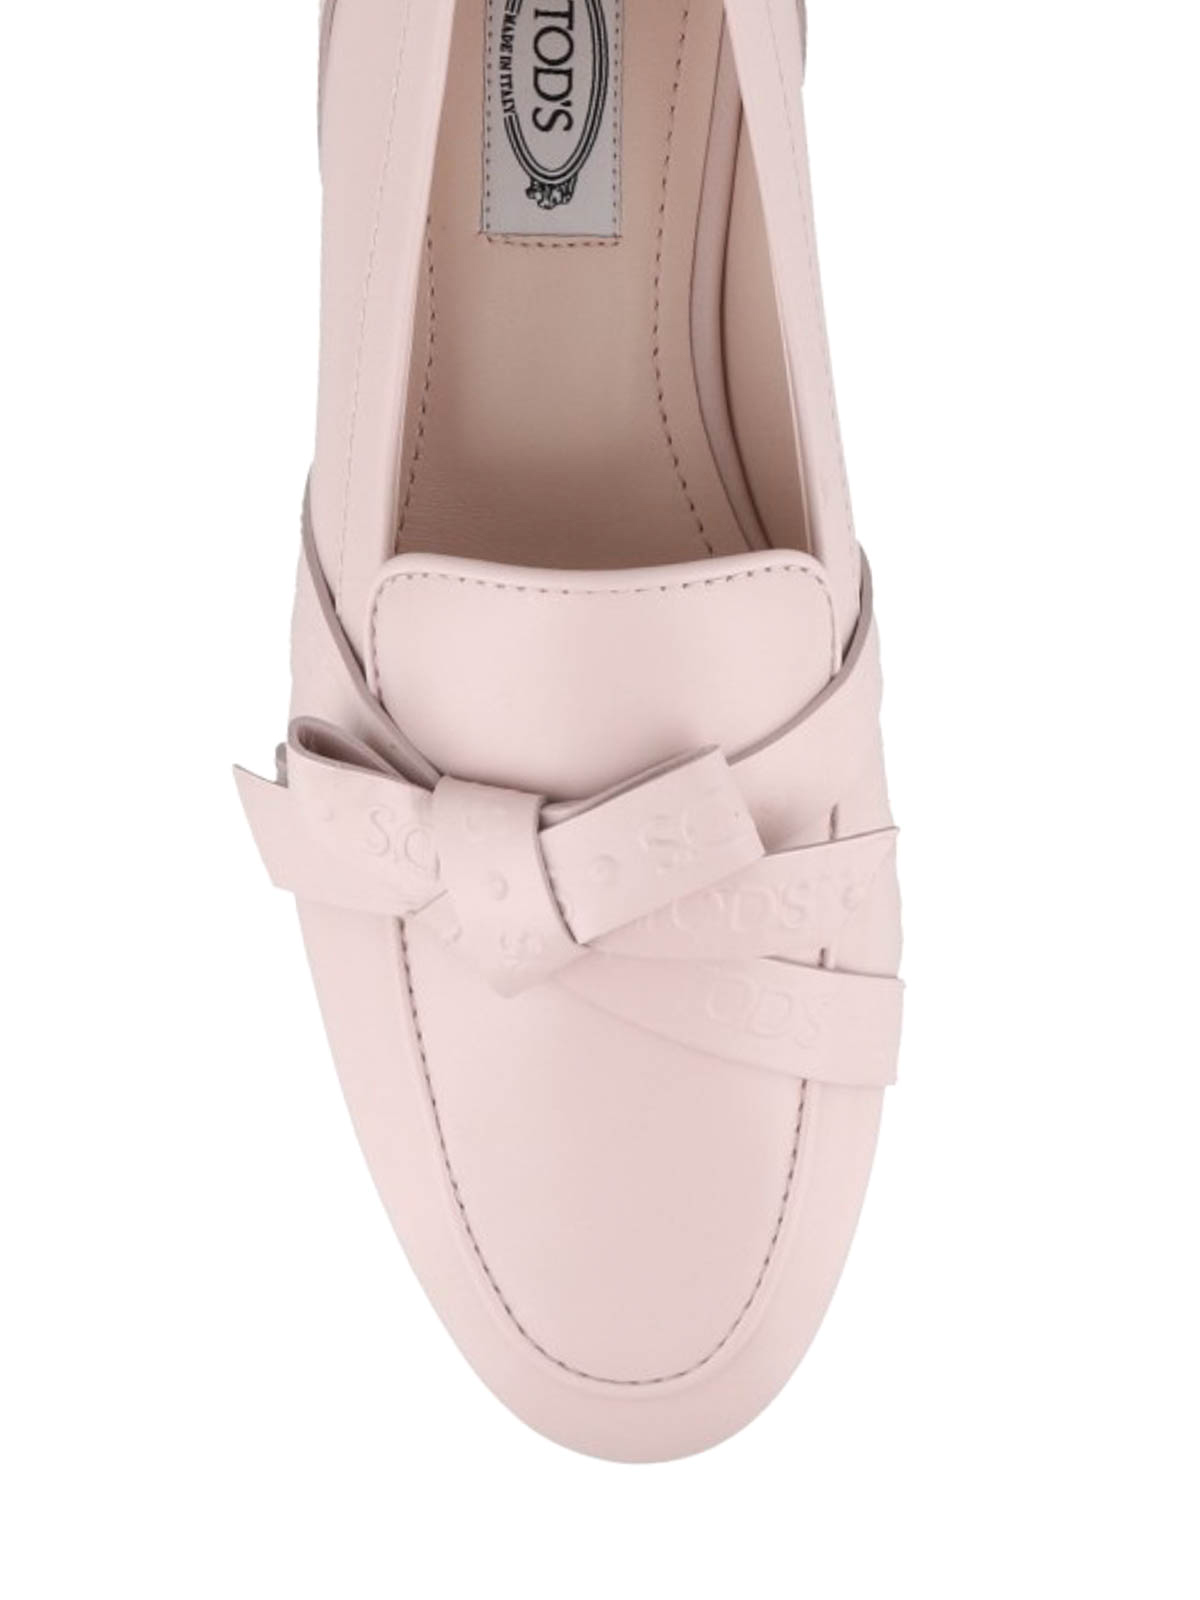 loafers with bow detail